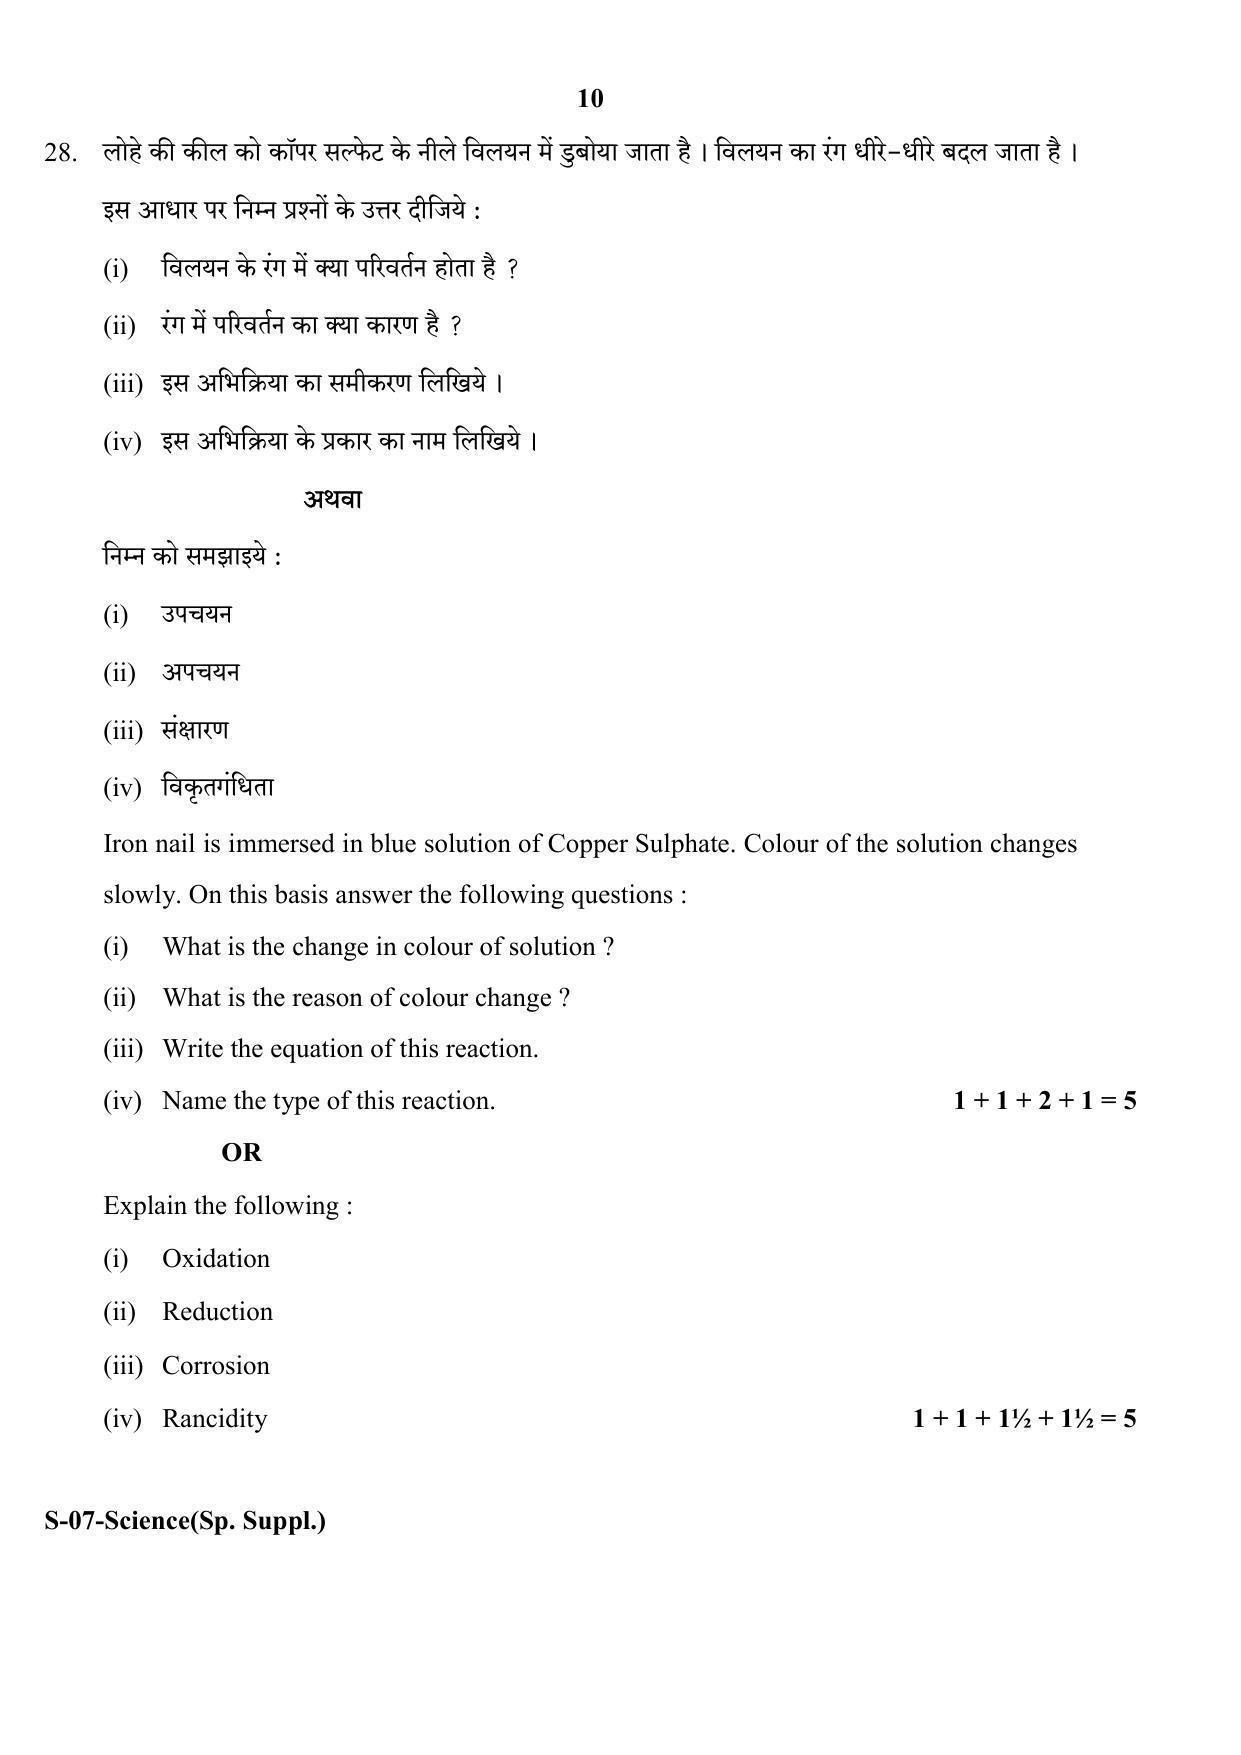 RBSE Class 10 Science ( supplementary) 2017 Question Paper - Page 10